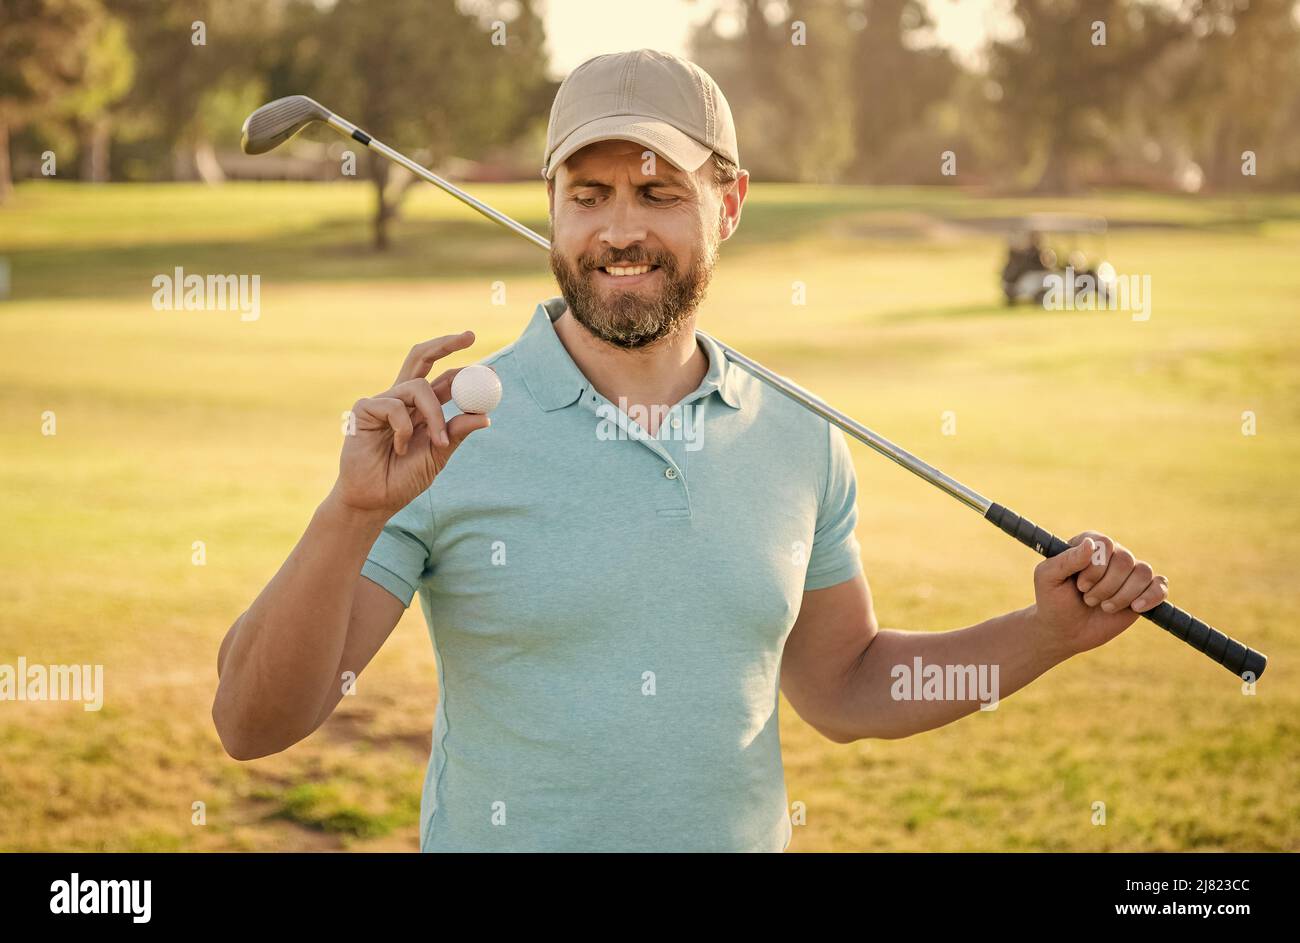 summer activity. professional sport outdoor. showing golf ball. male golf player Stock Photo